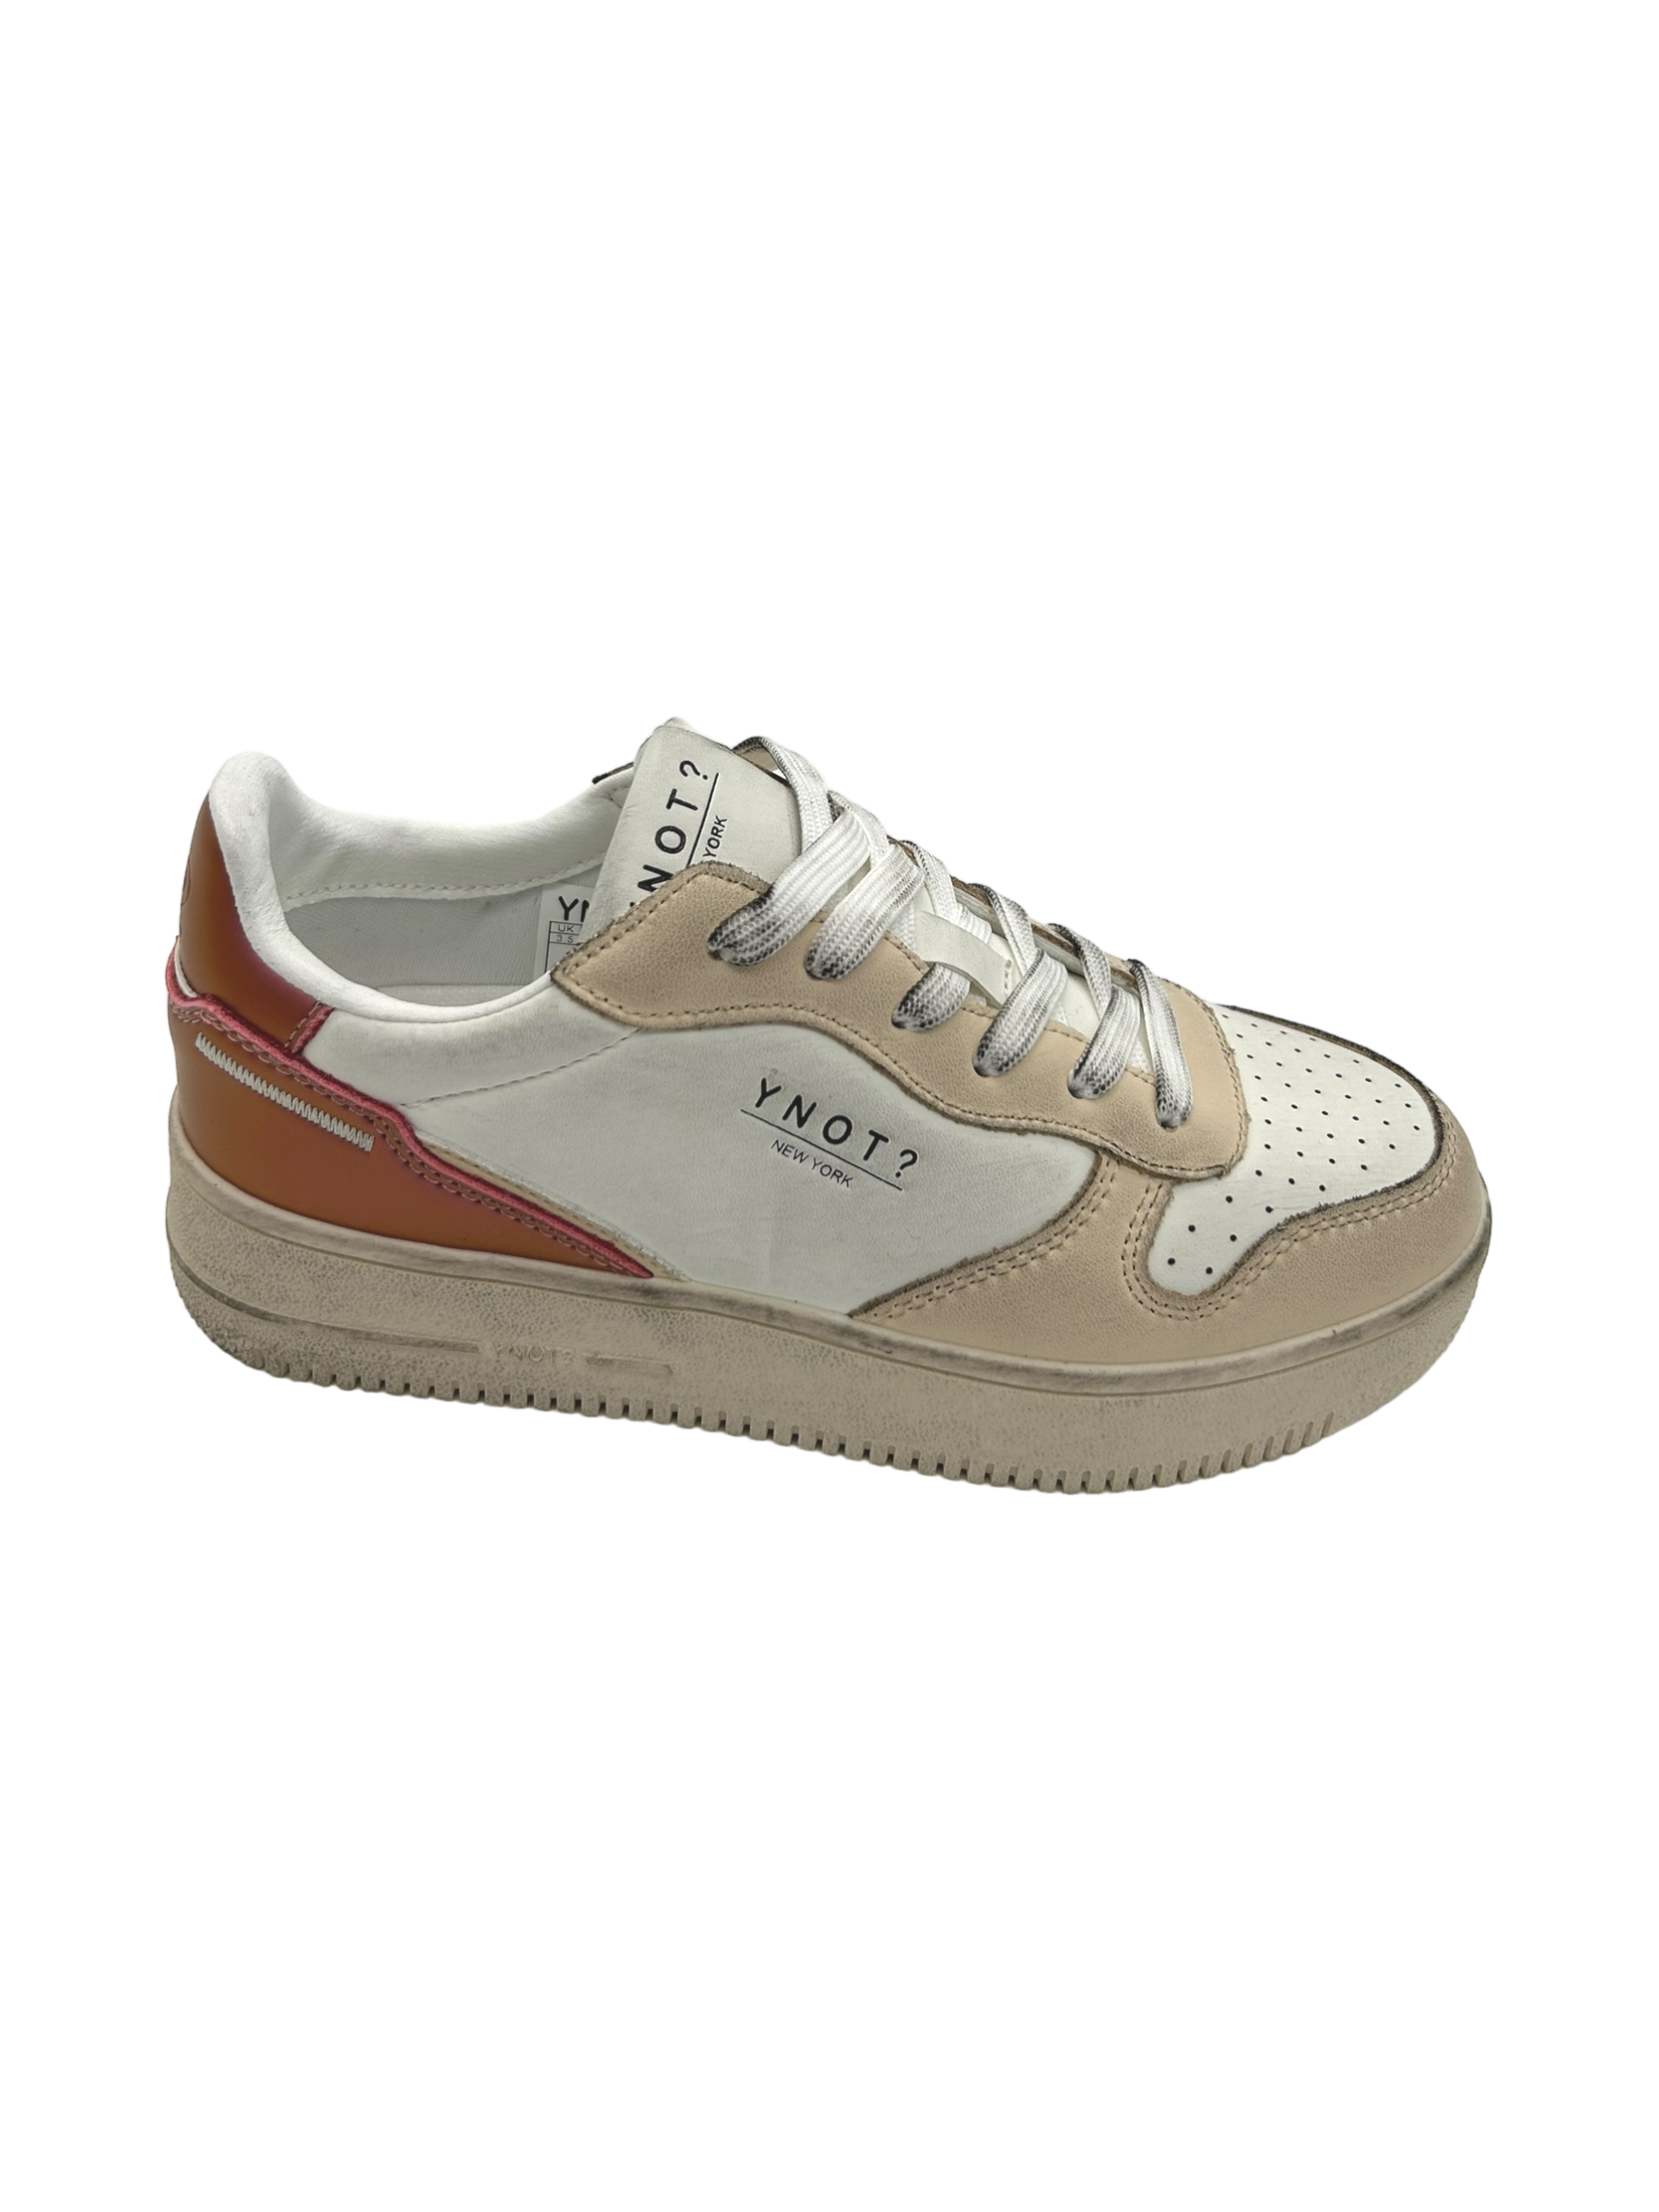 Sneakers donna YNOT? White Begonia - YNP4310 -